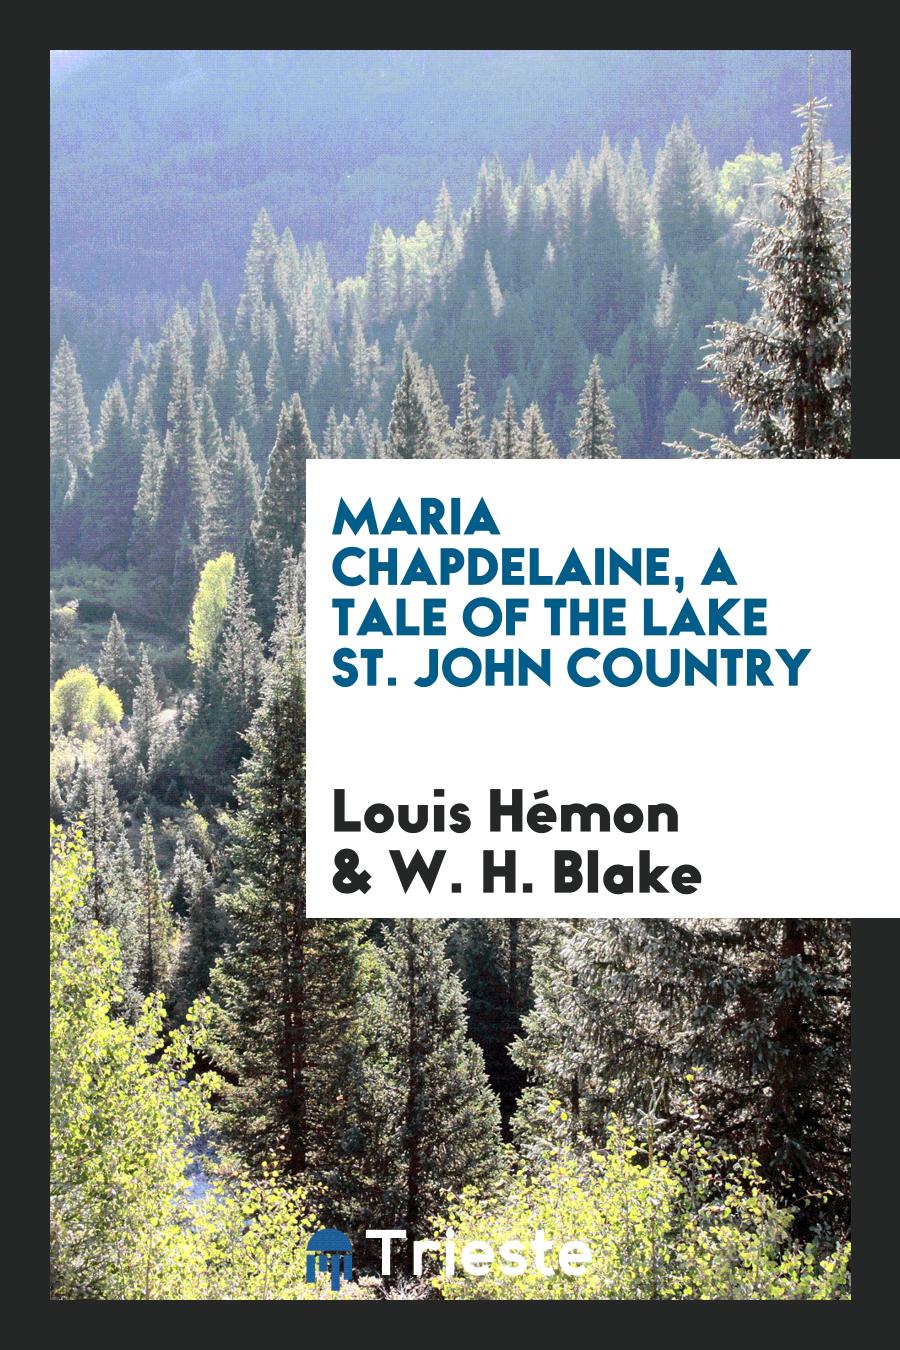 Maria Chapdelaine, a Tale of the Lake St. John Country